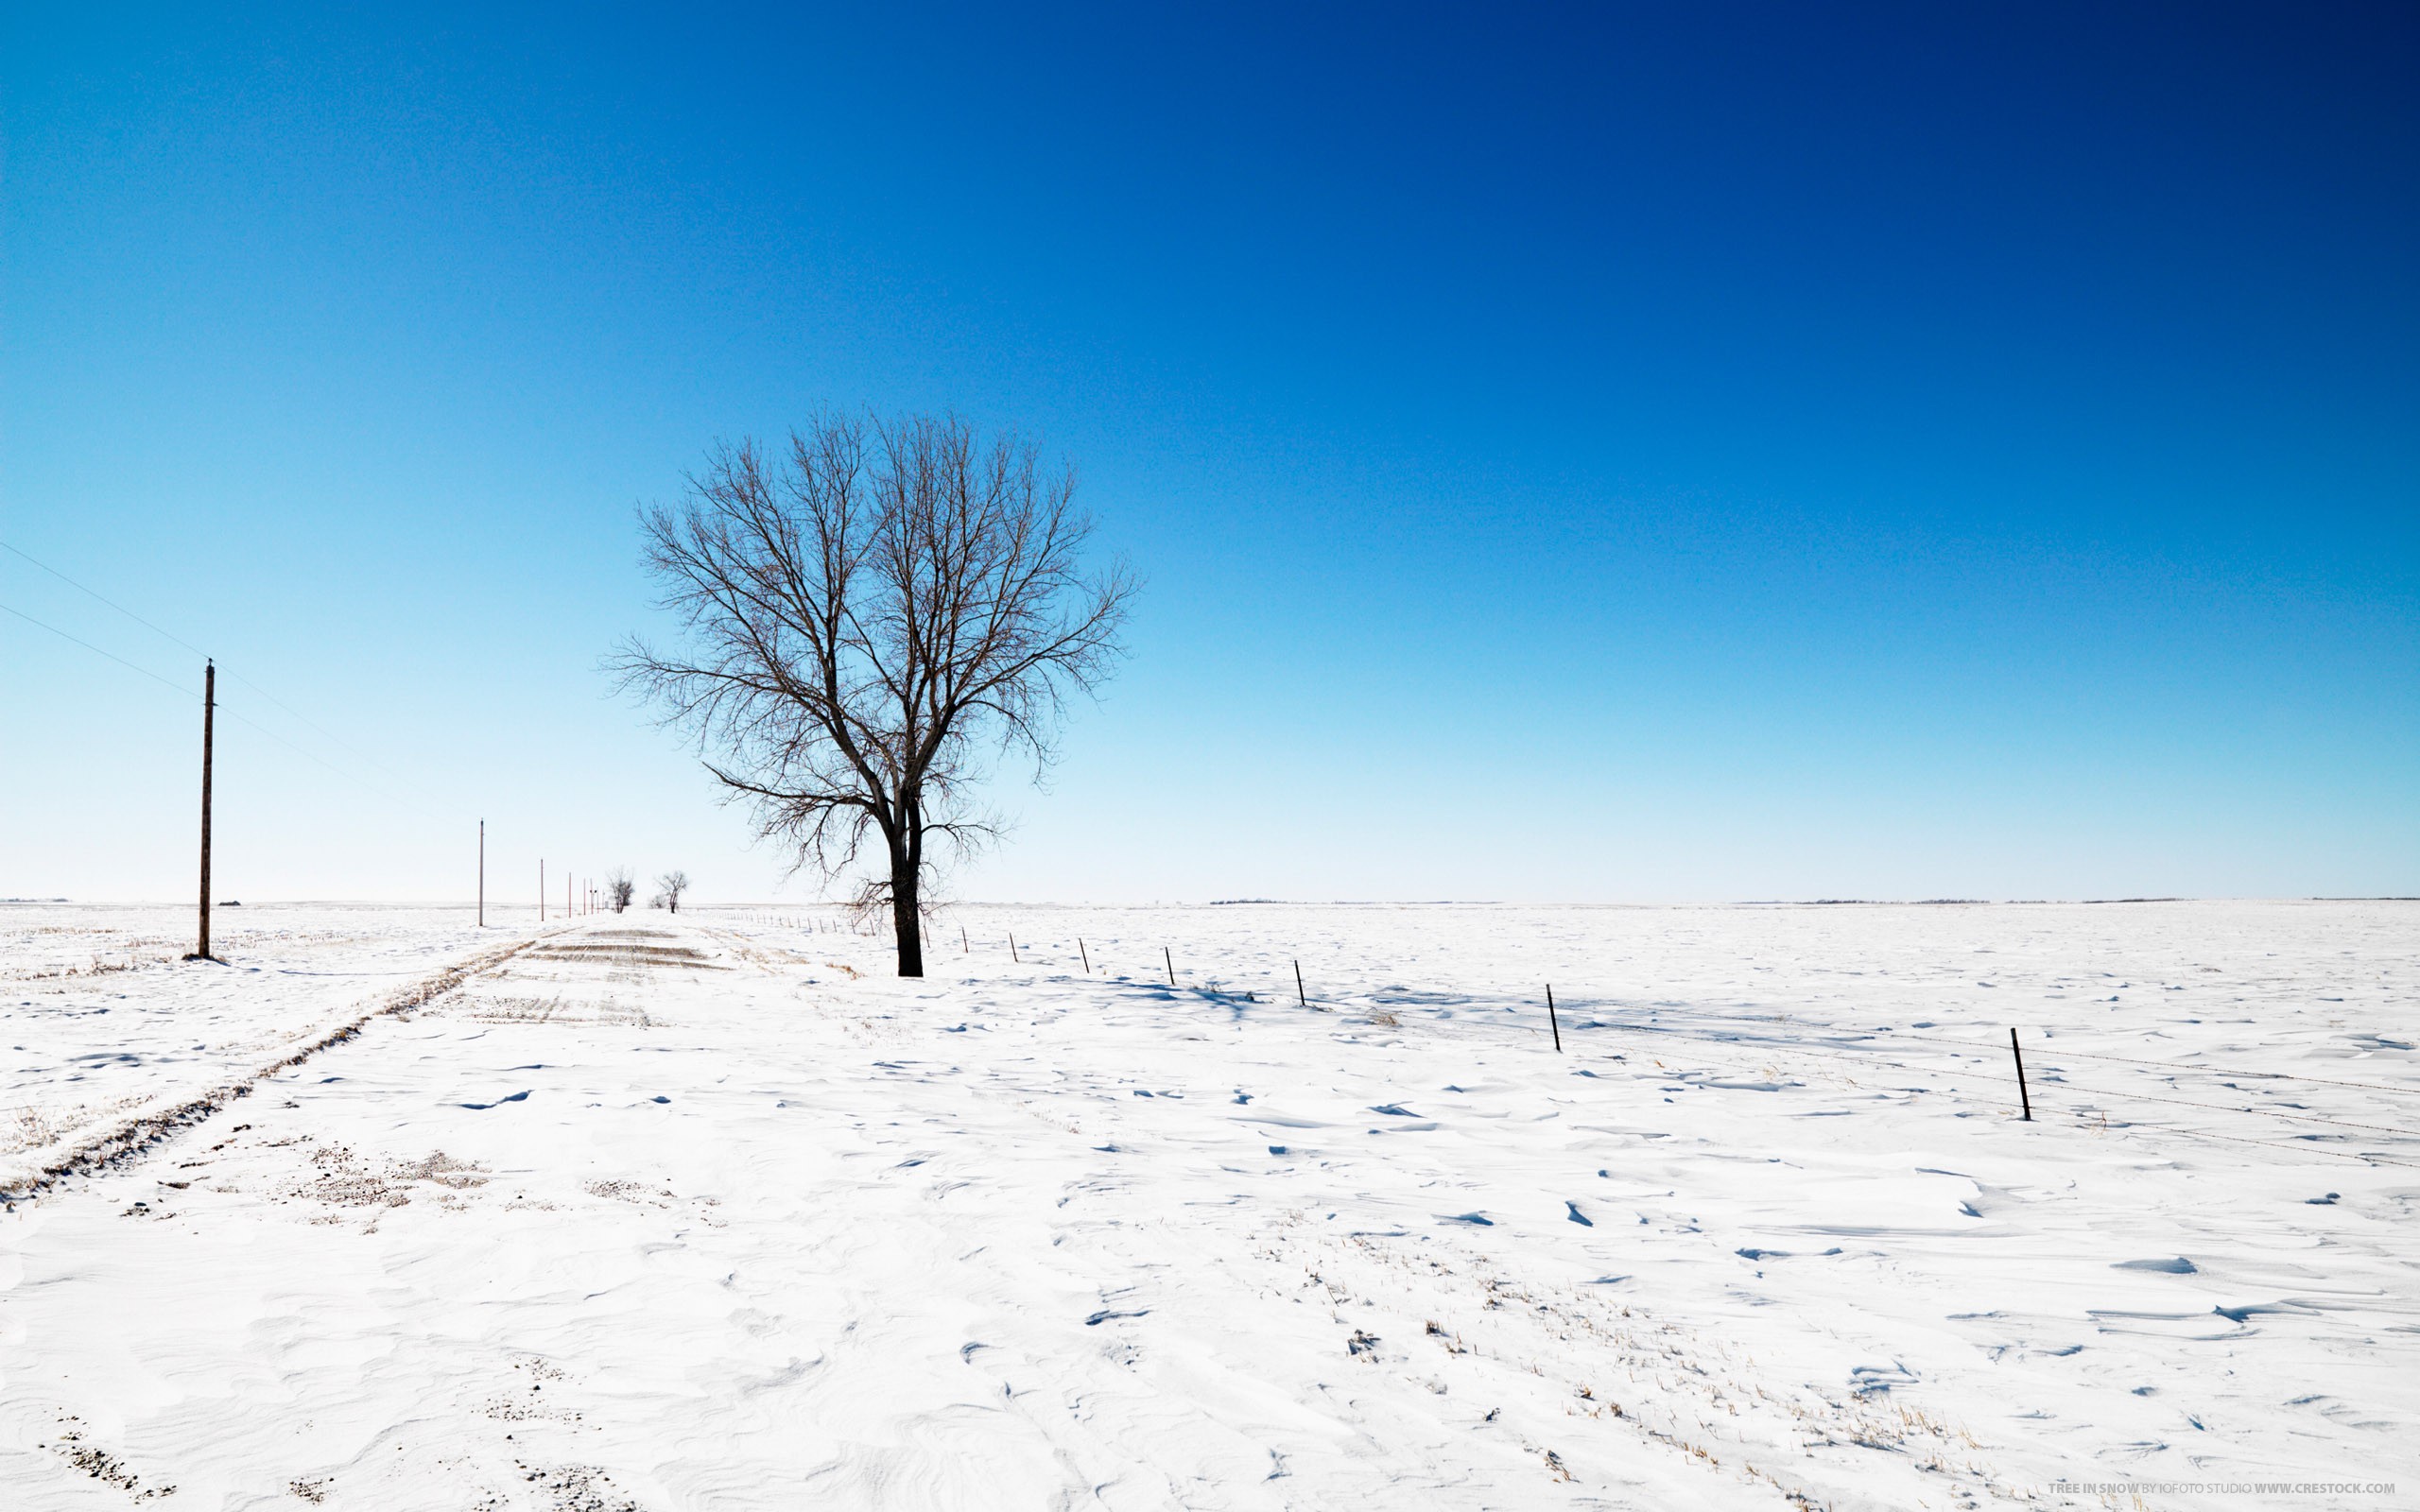 General 2560x1600 photography landscape nature winter trees snow road field